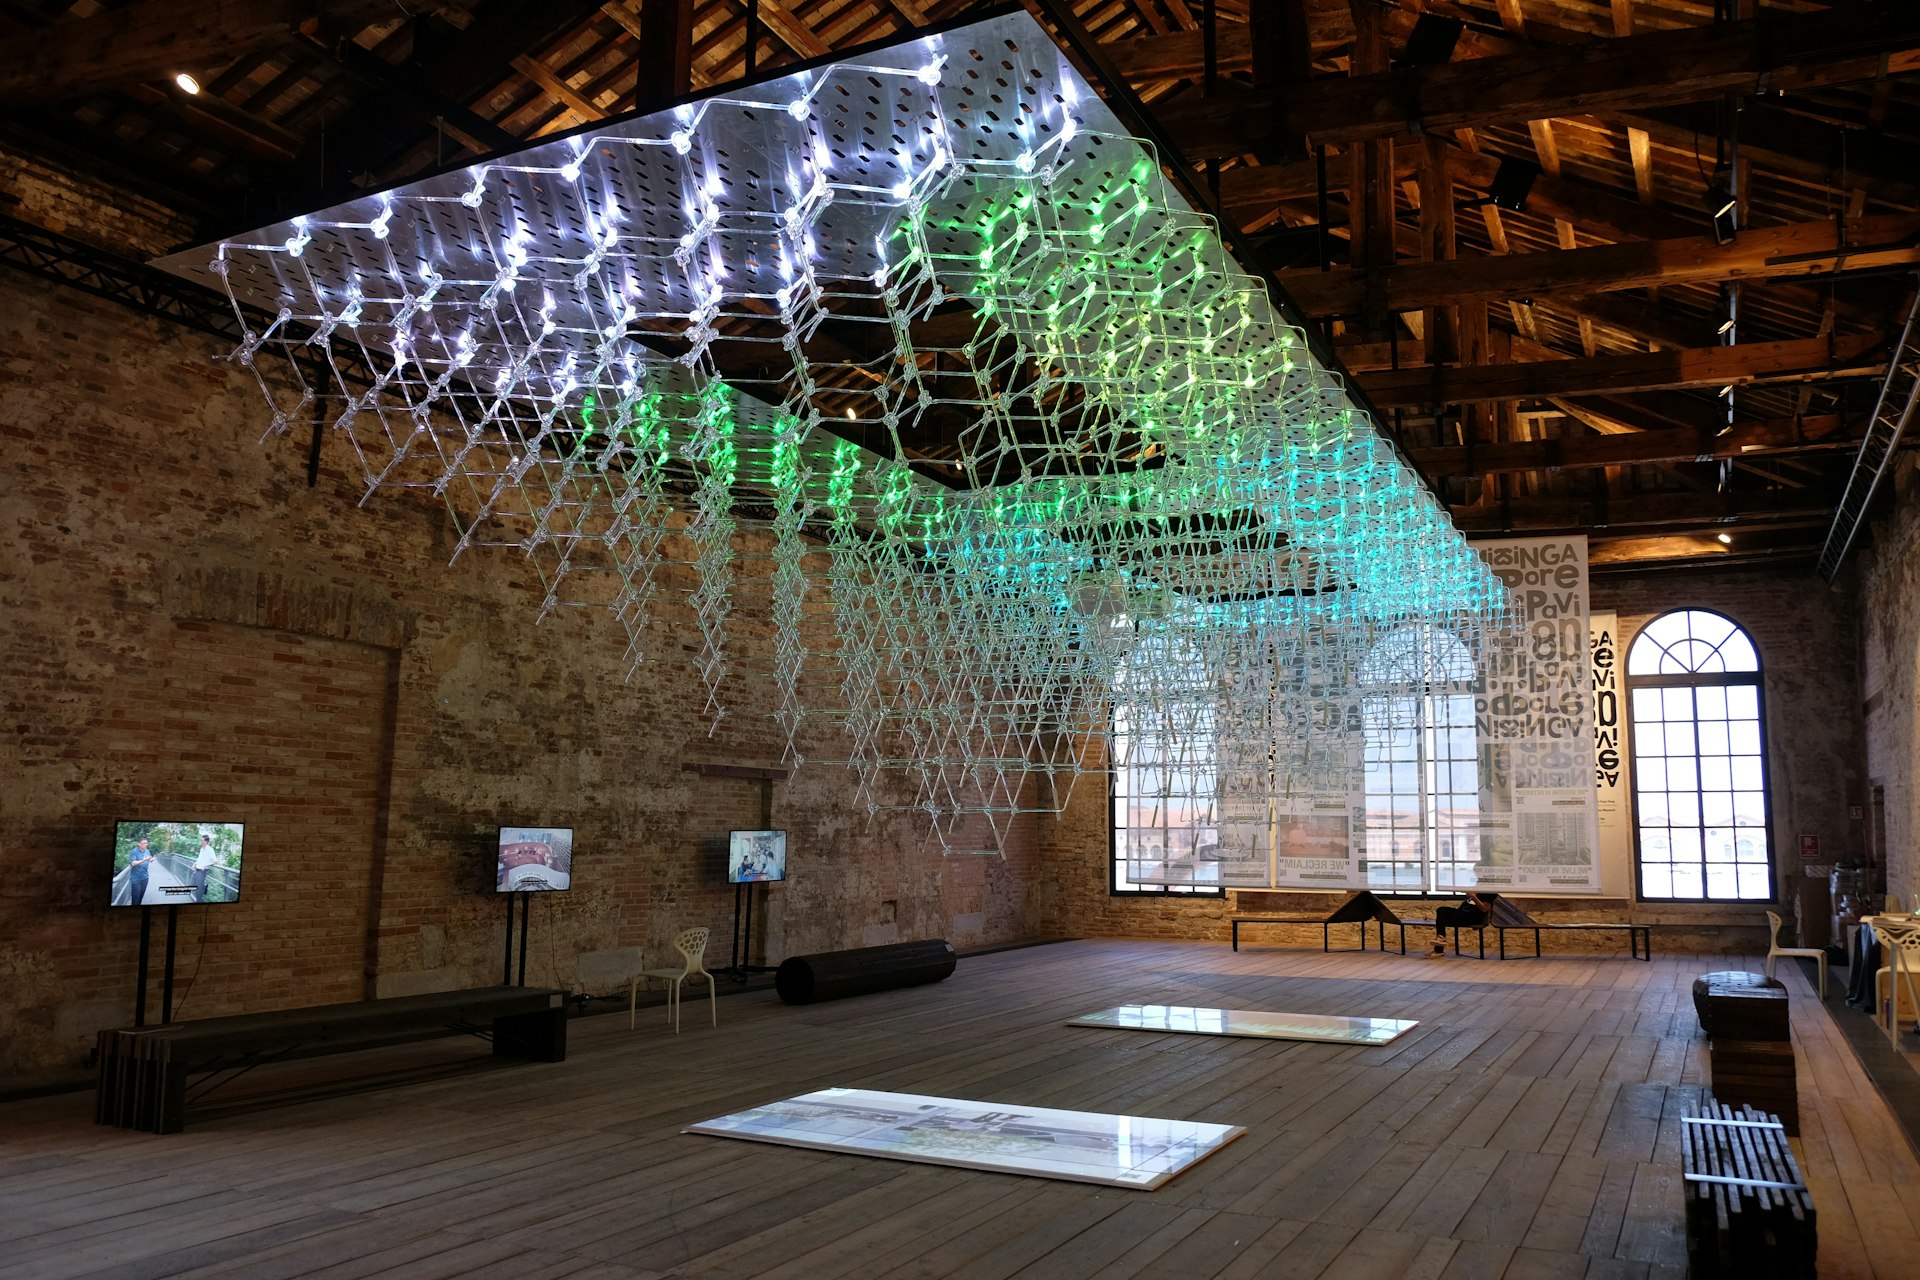 Installation artwork hangs from the ceiling in a warehouse-like room